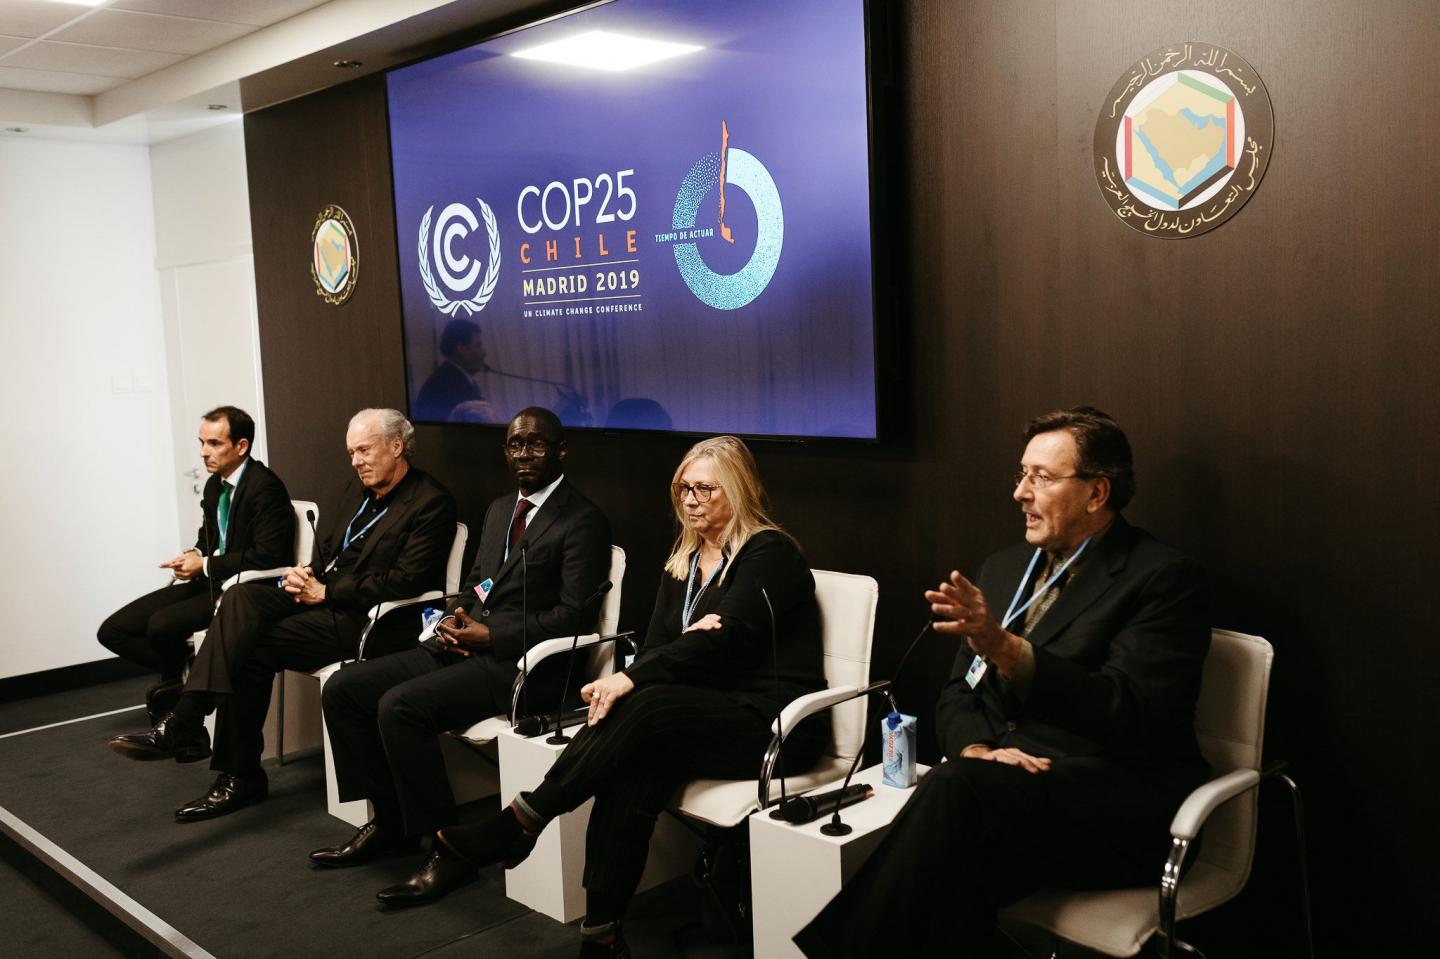 Scientists and Innovators Present the Circular Carbon Economy at COP25